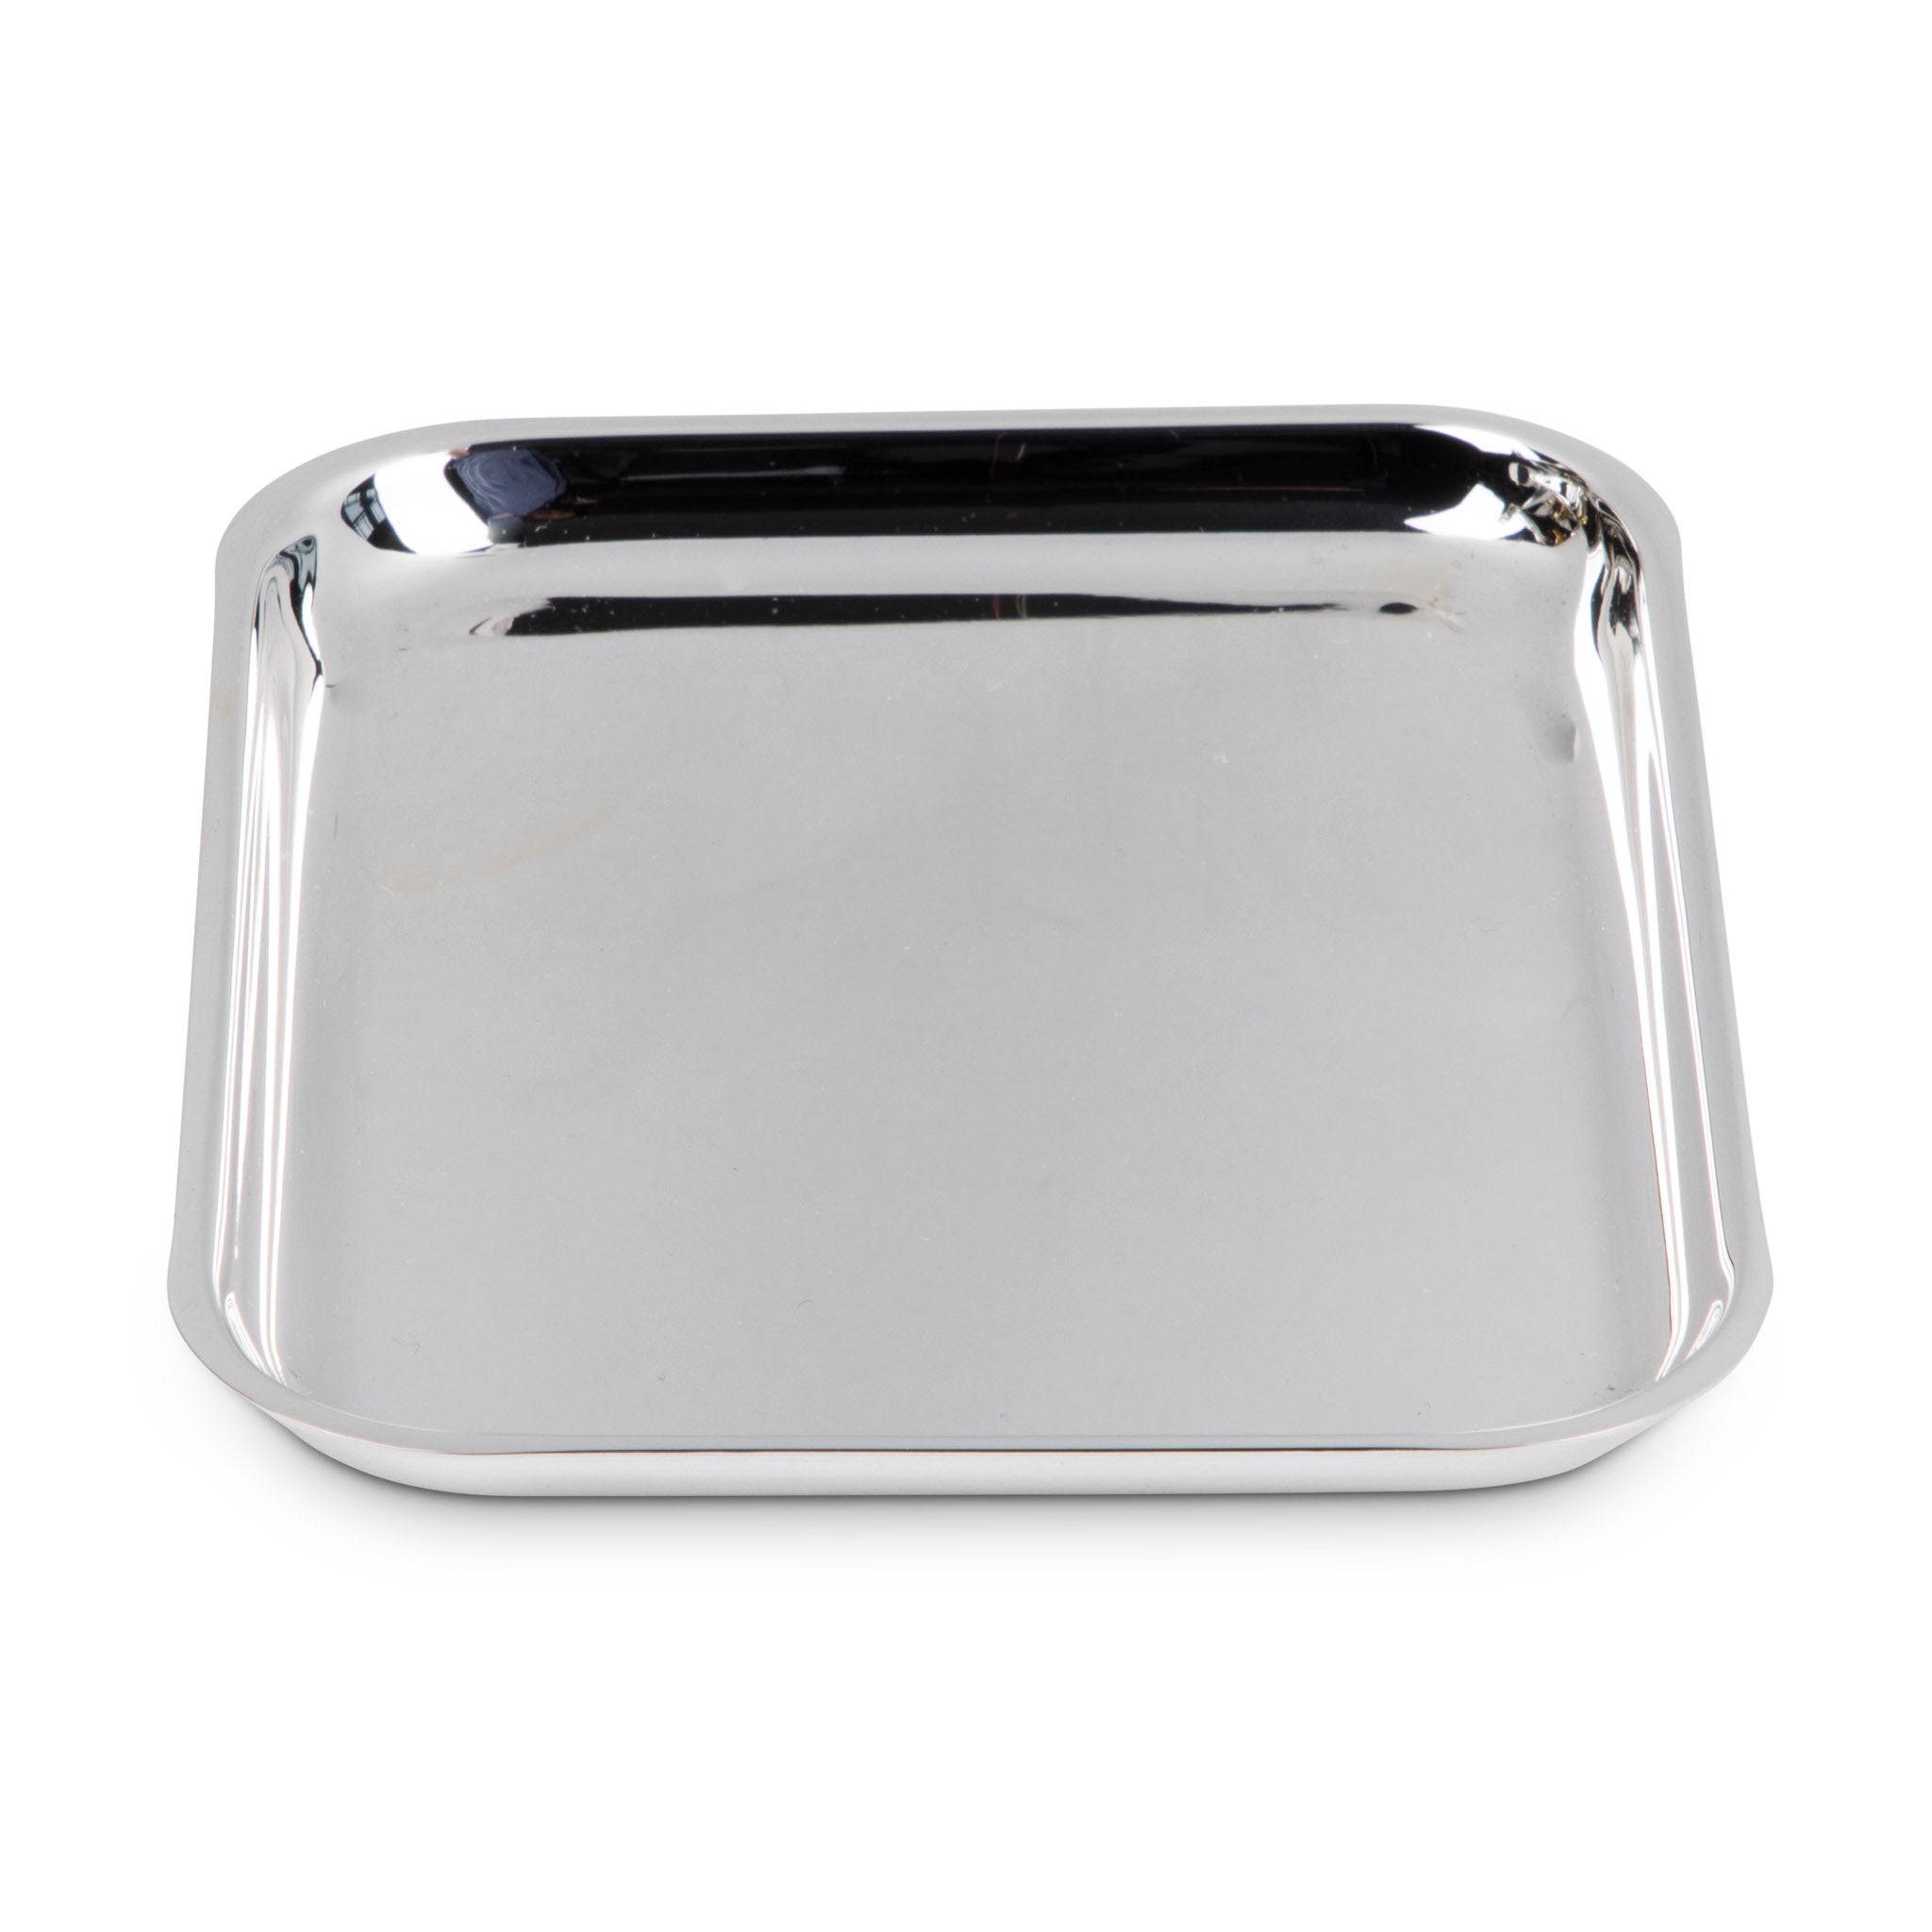 Sterling Silver Ashtray Catchall